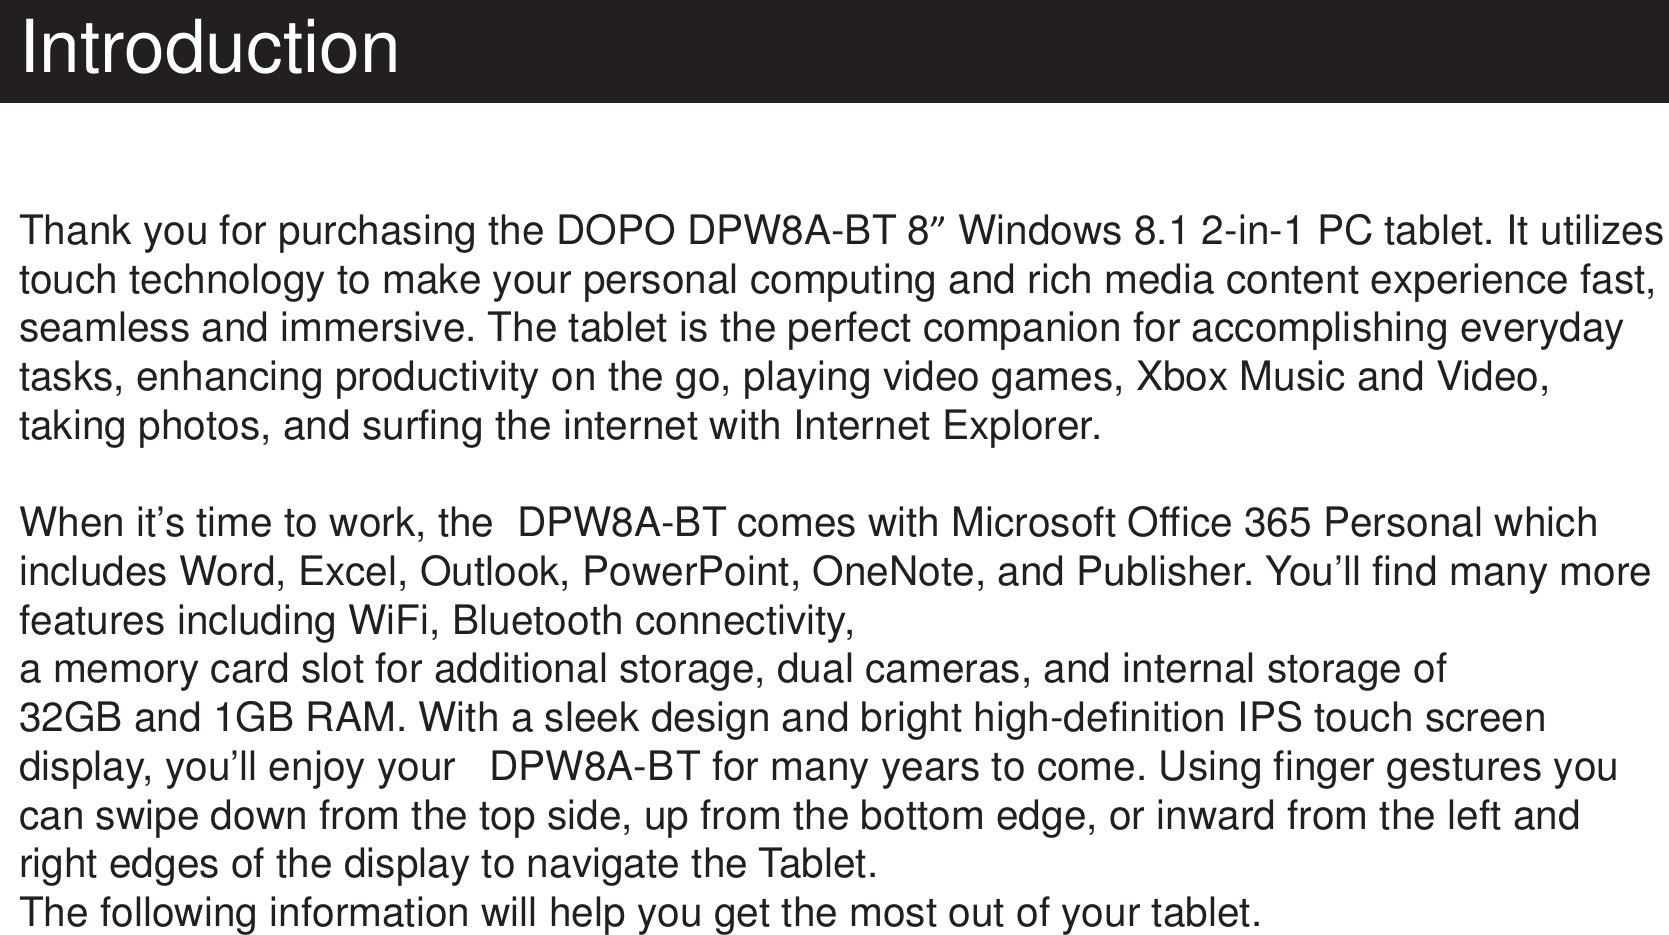 IntroductionThank you for purchasing the DOPO DPW8A-BT 8” Windows 8.1 2-in-1 PC tablet. It utilizes touch technology to make your personal computing and rich media content experience fast, seamless and immersive. The tablet is the perfect companion for accomplishing everyday tasks, enhancing productivity on the go, playing video games, Xbox Music and Video, taking photos, and surfing the internet with Internet Explorer.When it’s time to work, the  DPW8A-BT comes with Microsoft Office 365 Personal which includes Word, Excel, Outlook, PowerPoint, OneNote, and Publisher. You’ll find many more features including WiFi, Bluetooth connectivity,  a memory card slot for additional storage, dual cameras, and internal storage of 32GB and 1GB RAM. With a sleek design and bright high-definition IPS touch screen display, you’ll enjoy your   DPW8A-BT for many years to come. Using finger gestures you can swipe down from the top side, up from the bottom edge, or inward from the left and right edges of the display to navigate the Tablet.The following information will help you get the most out of your tablet.